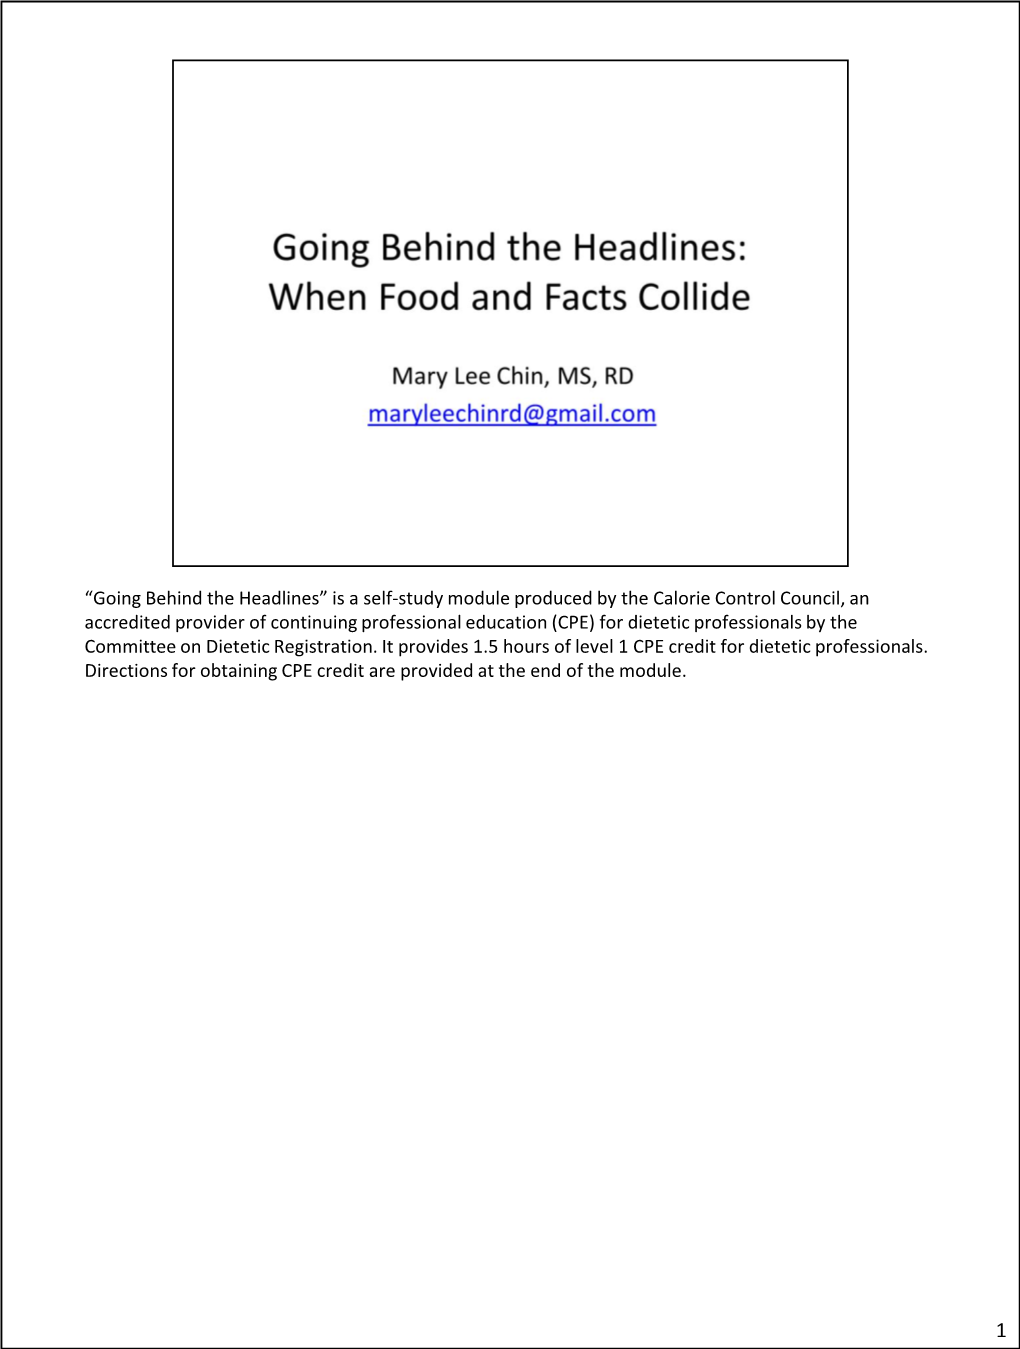 “Going Behind the Headlines” Is a Self-Study Module Produced by the Calorie Control Council, an Accredited Provider of Conti